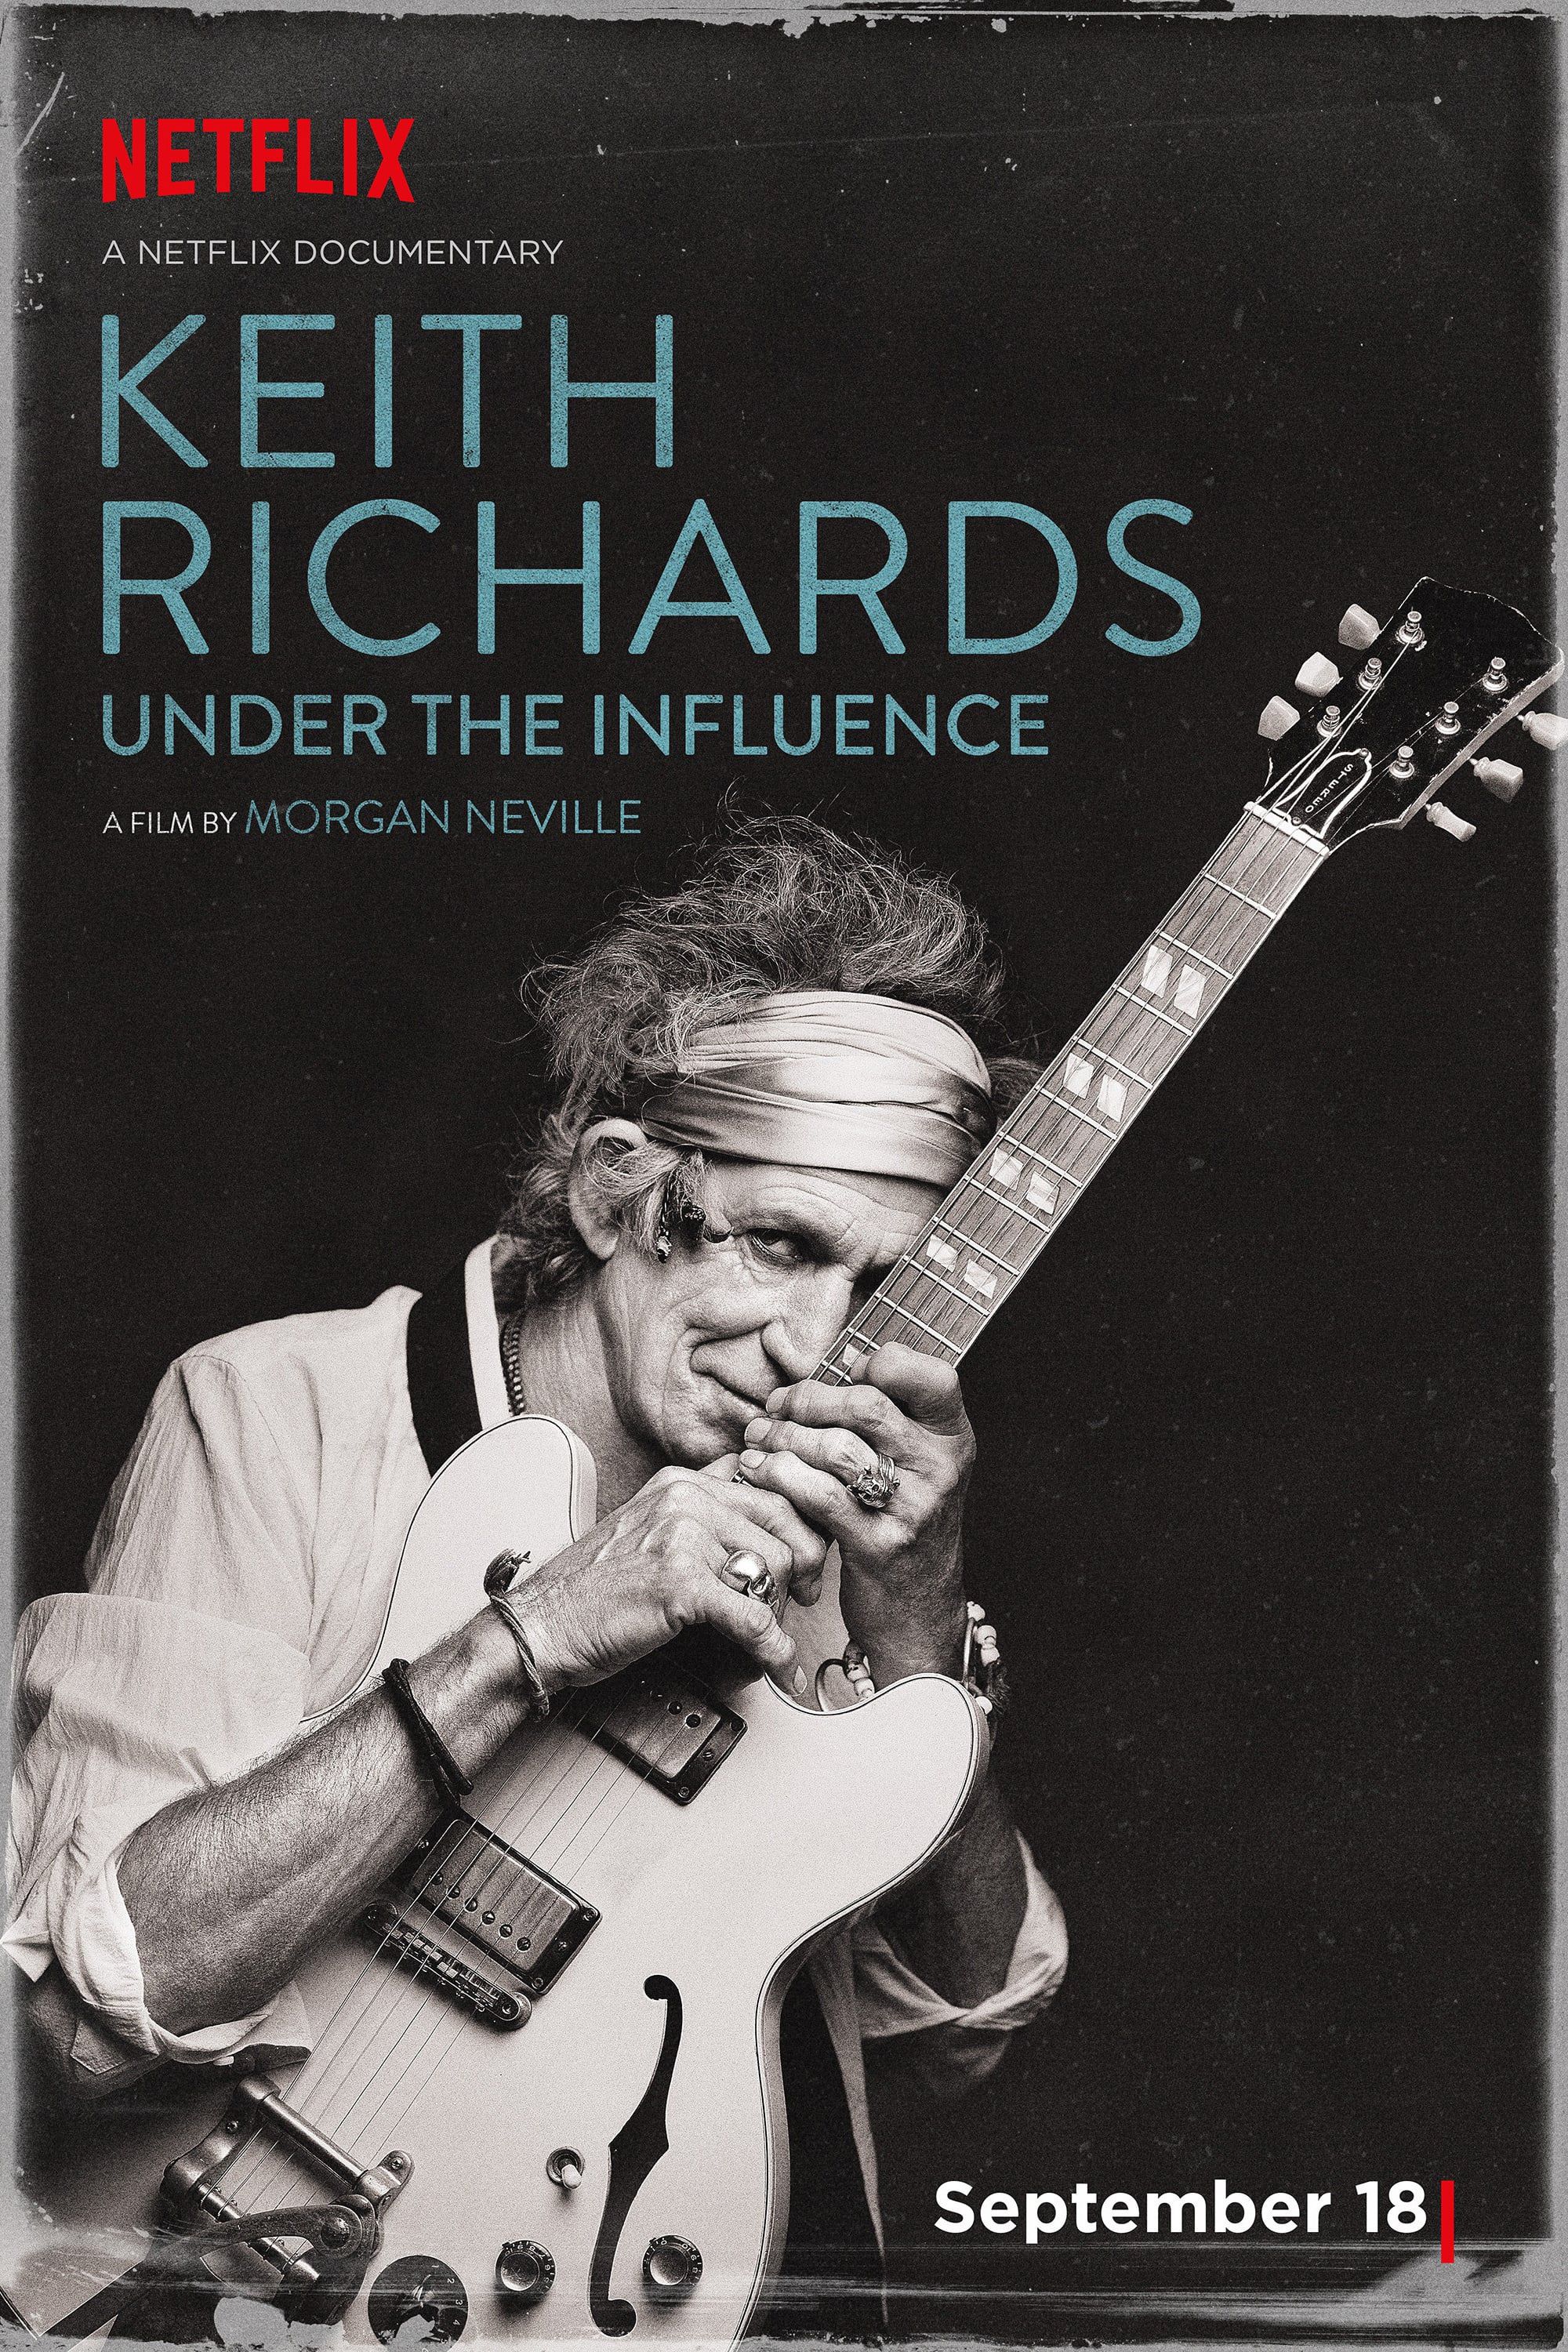 Keith Richards: Under the Influence - Documentaire (2015) streaming VF gratuit complet